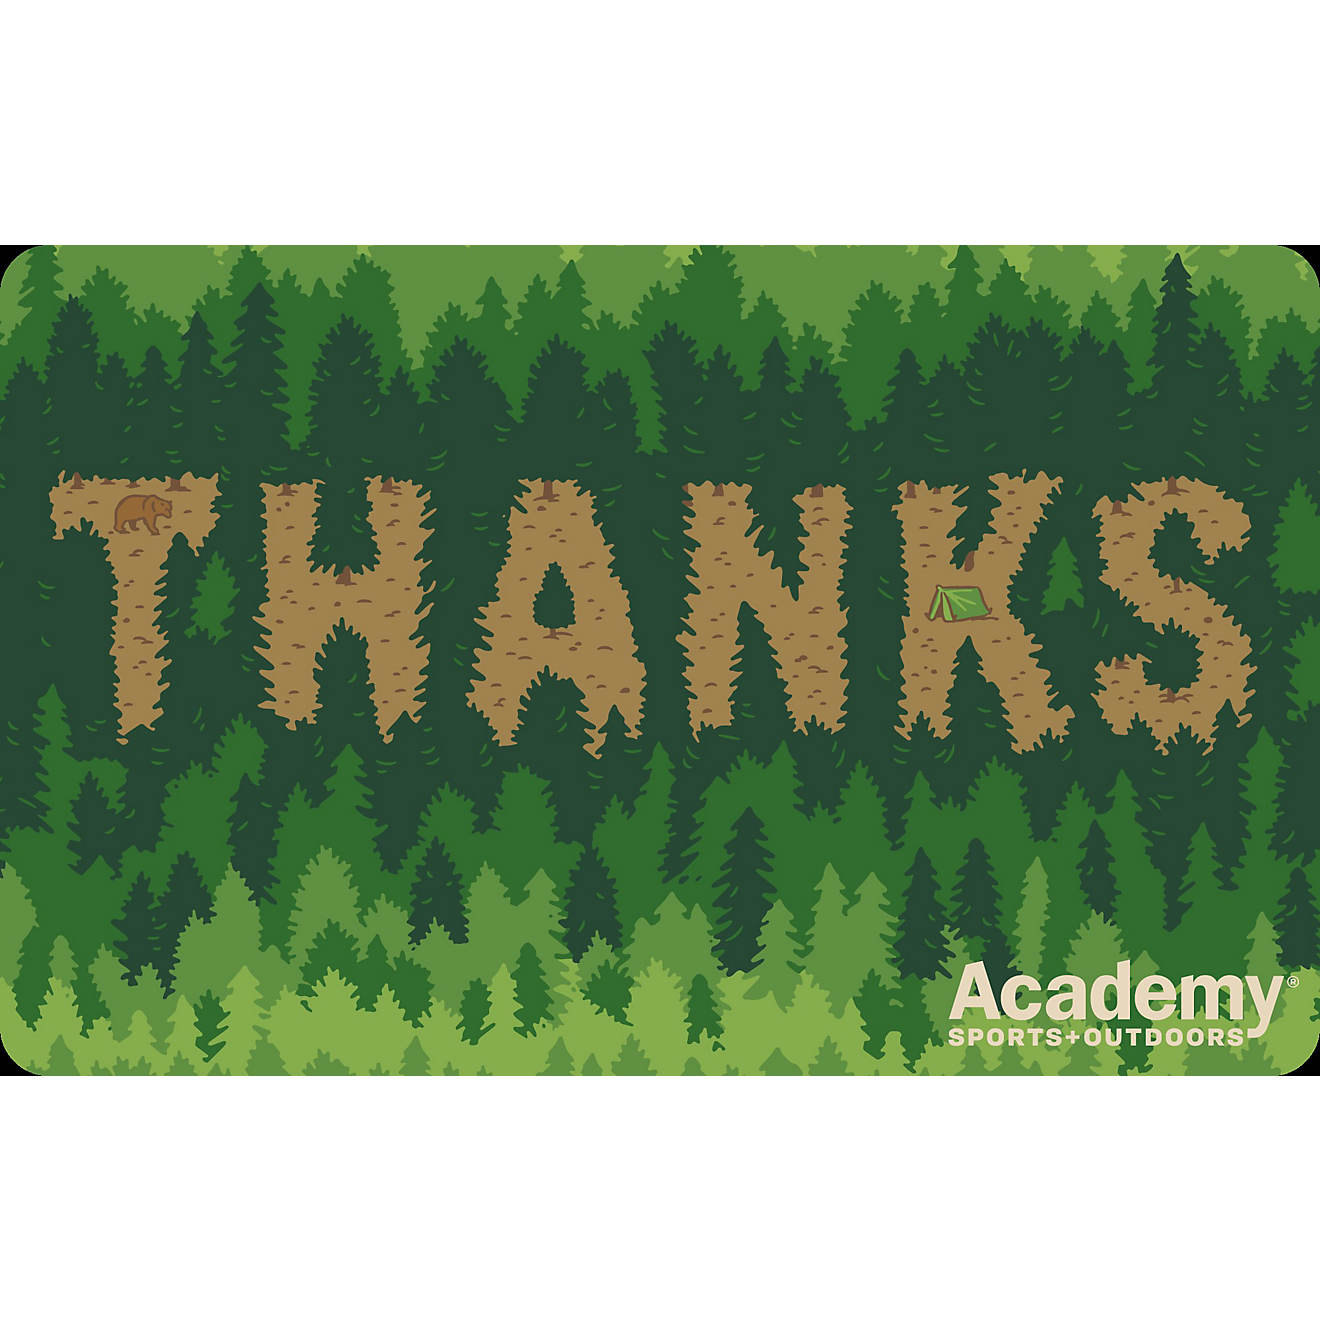 eGift Card - Academy Thanks Forest                                                                                               image